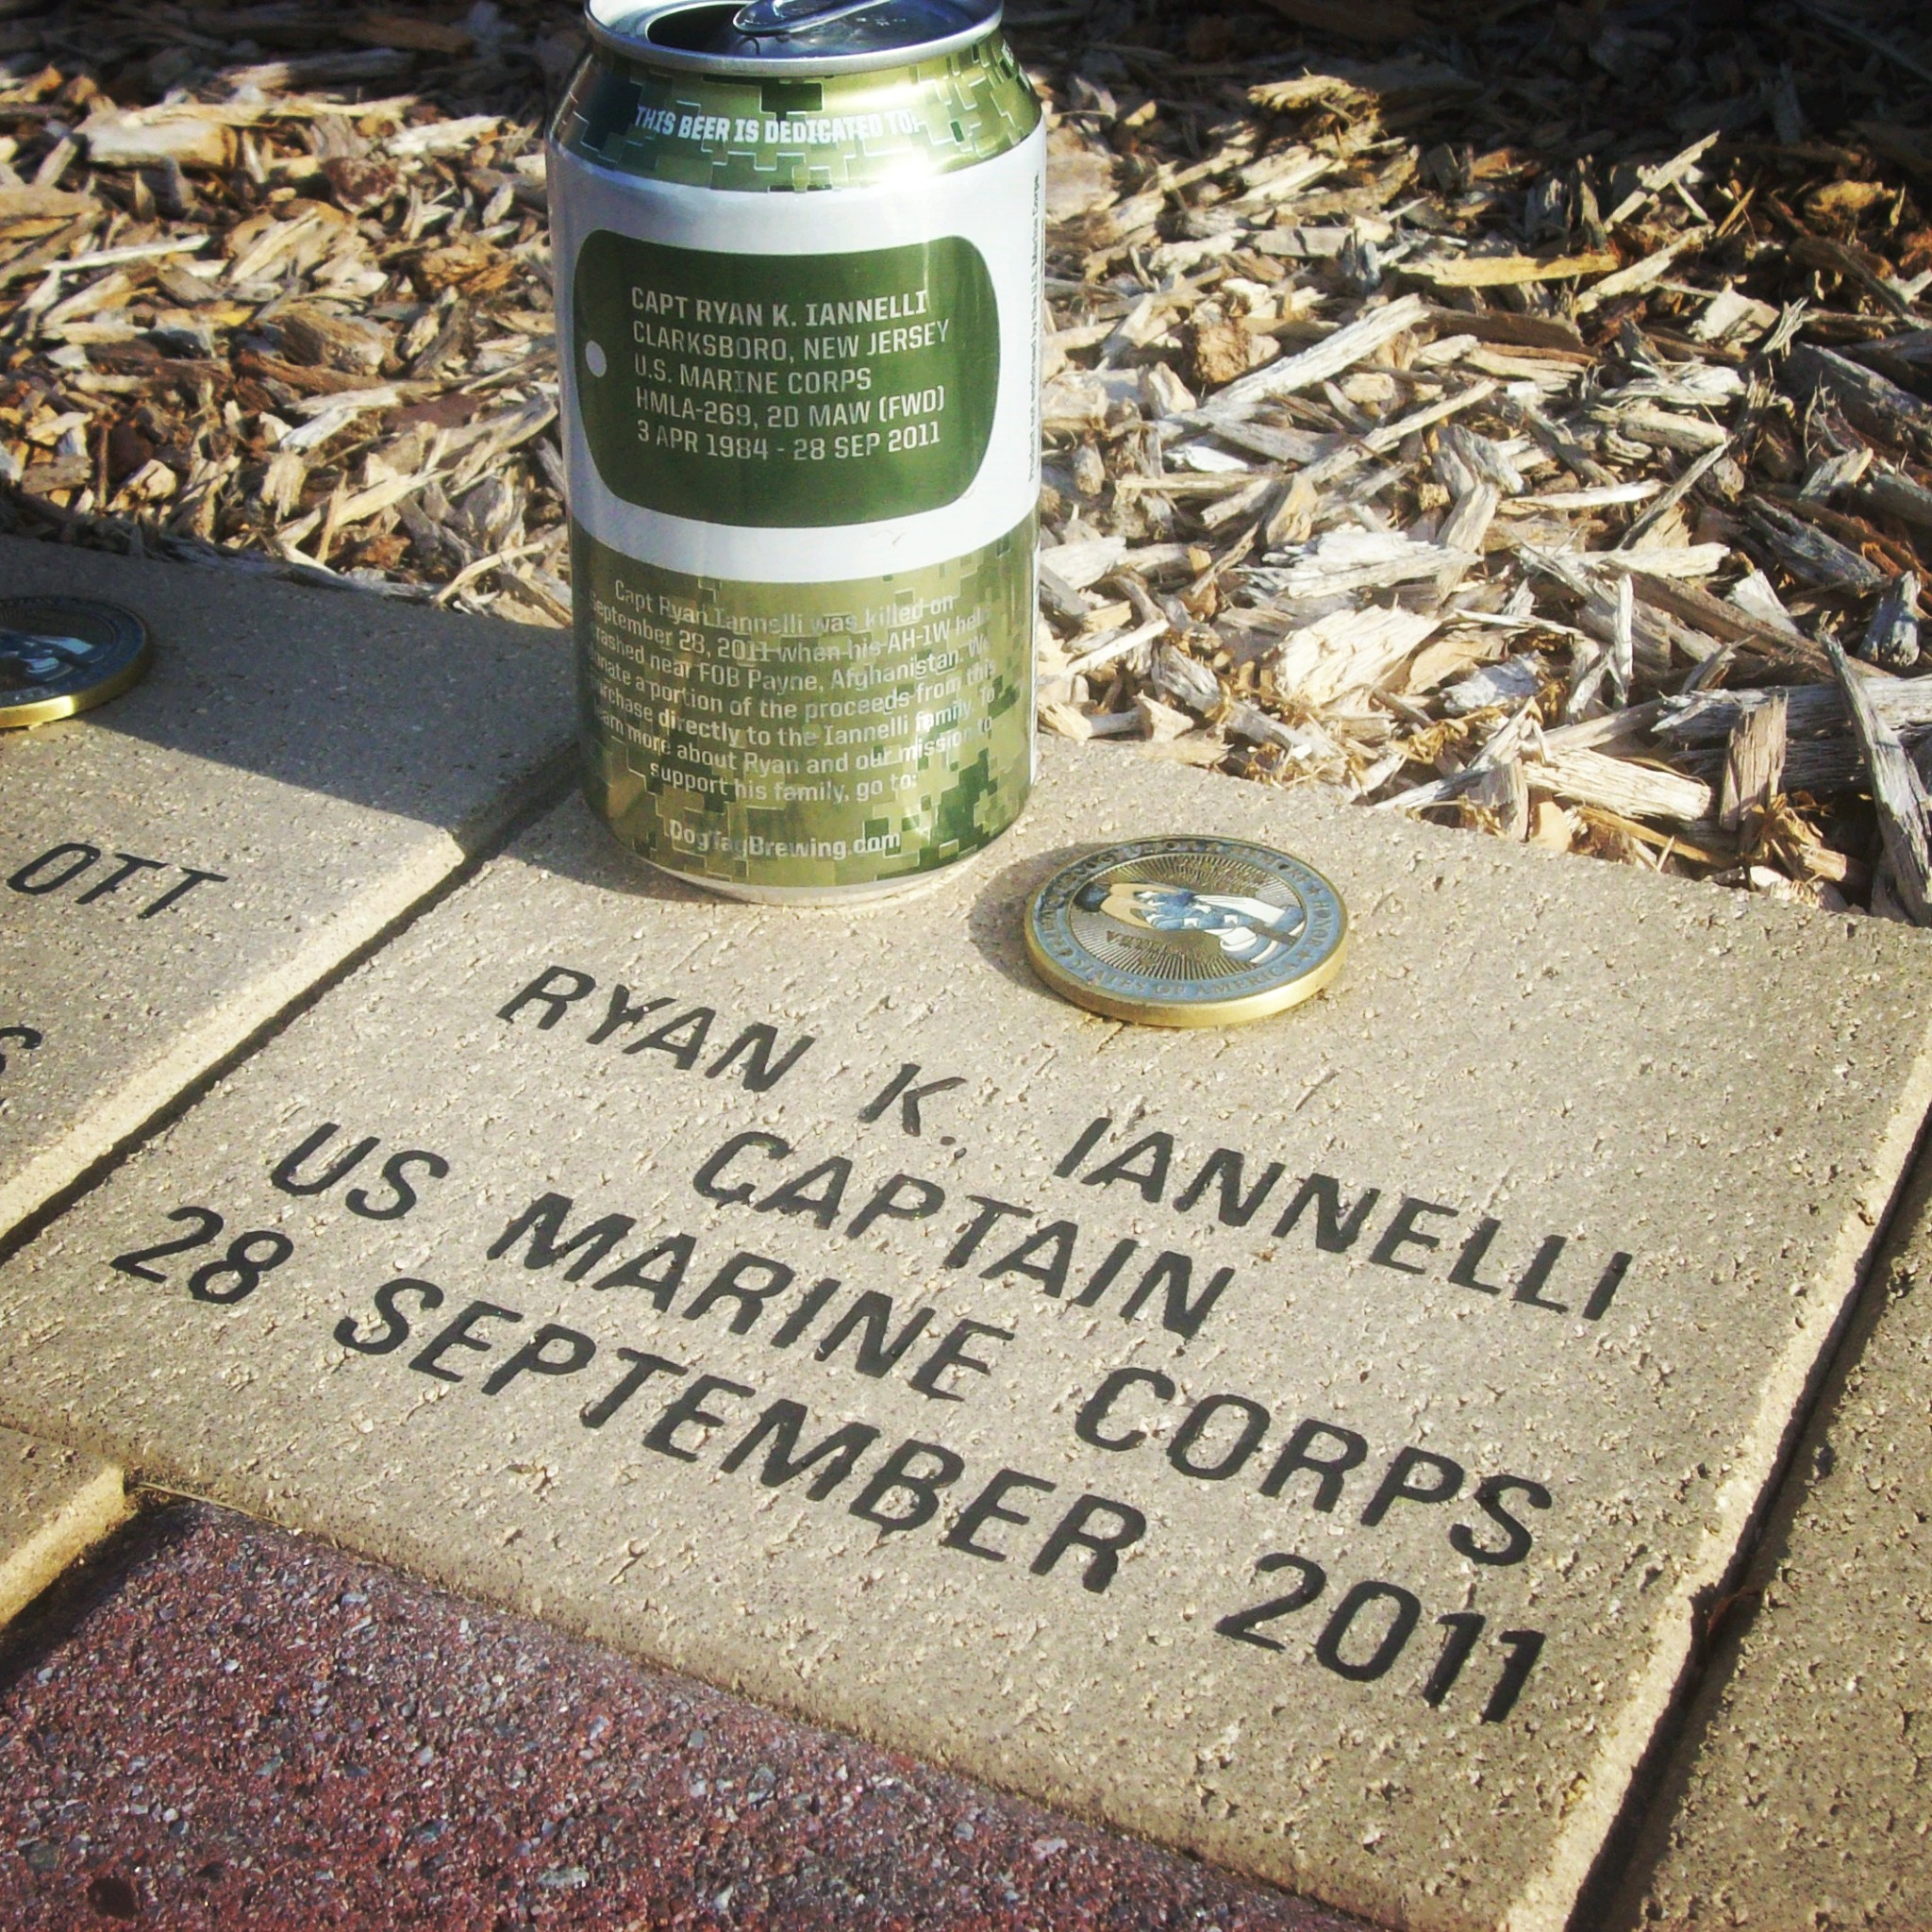 Ryan's tribute can next to his memorial stone in Mt. Olive, NJ.